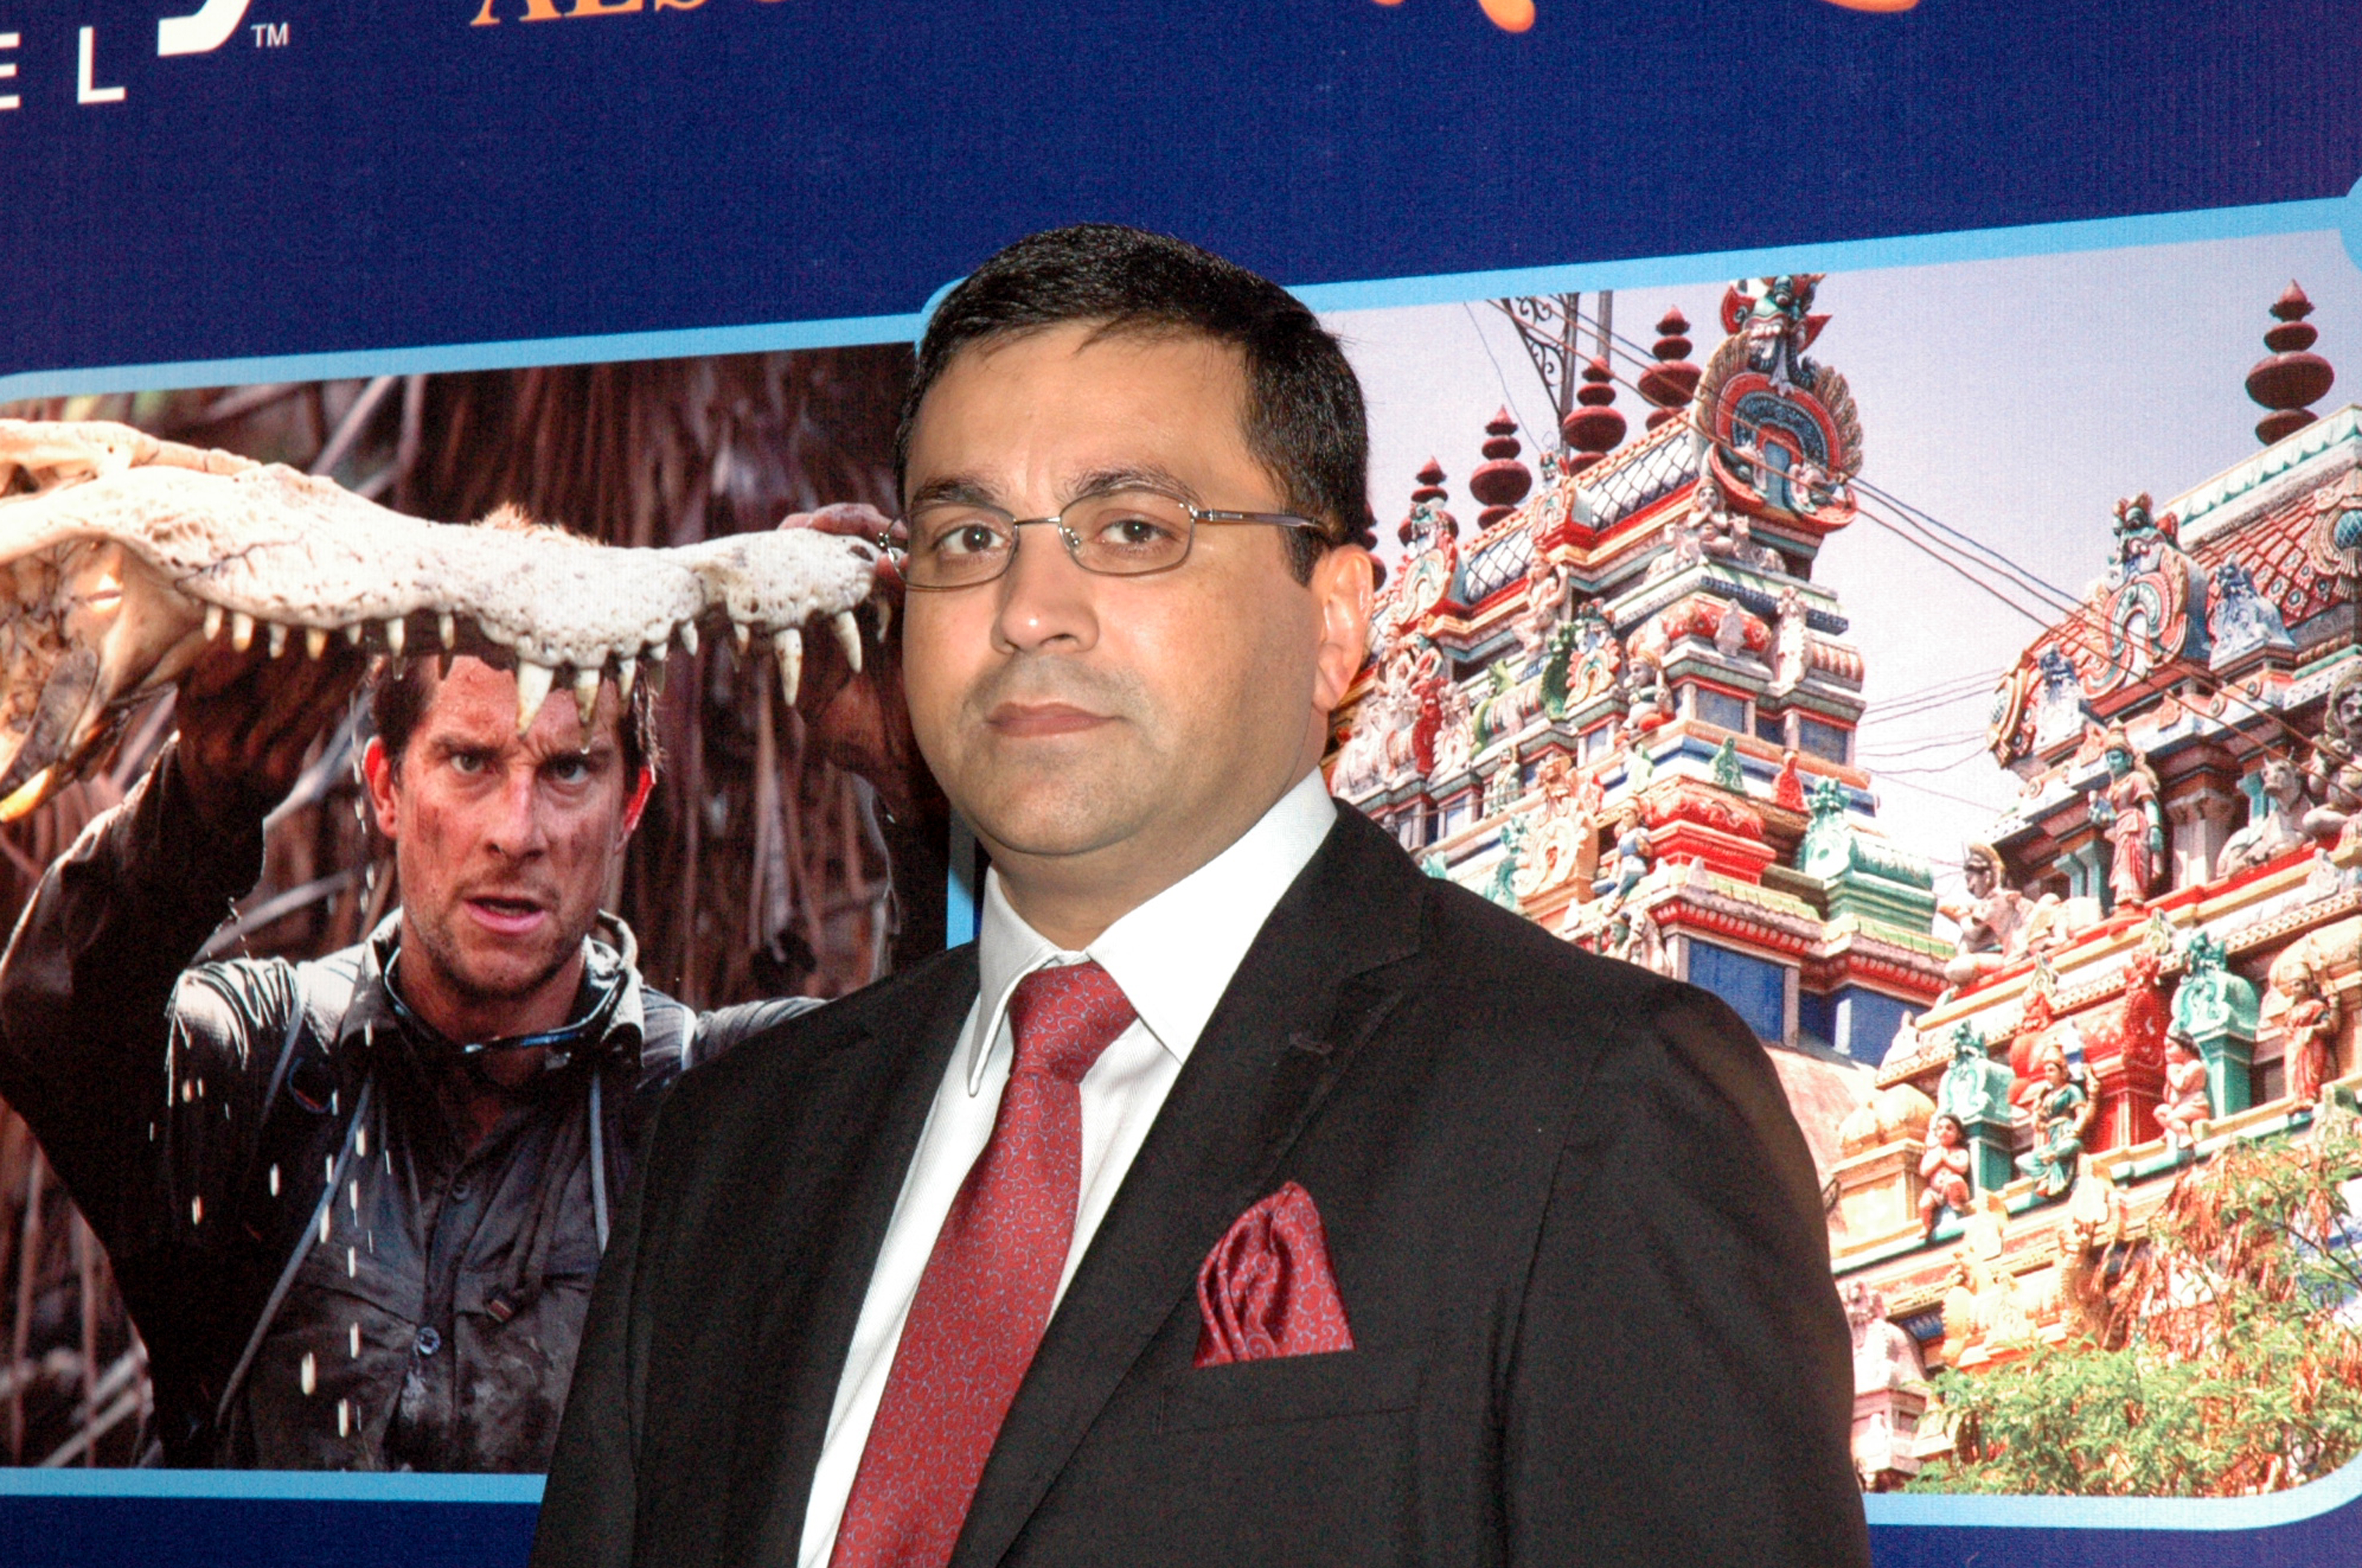 Rahul Johri has been accused of harassment by a married woman on the BCCI payroll.